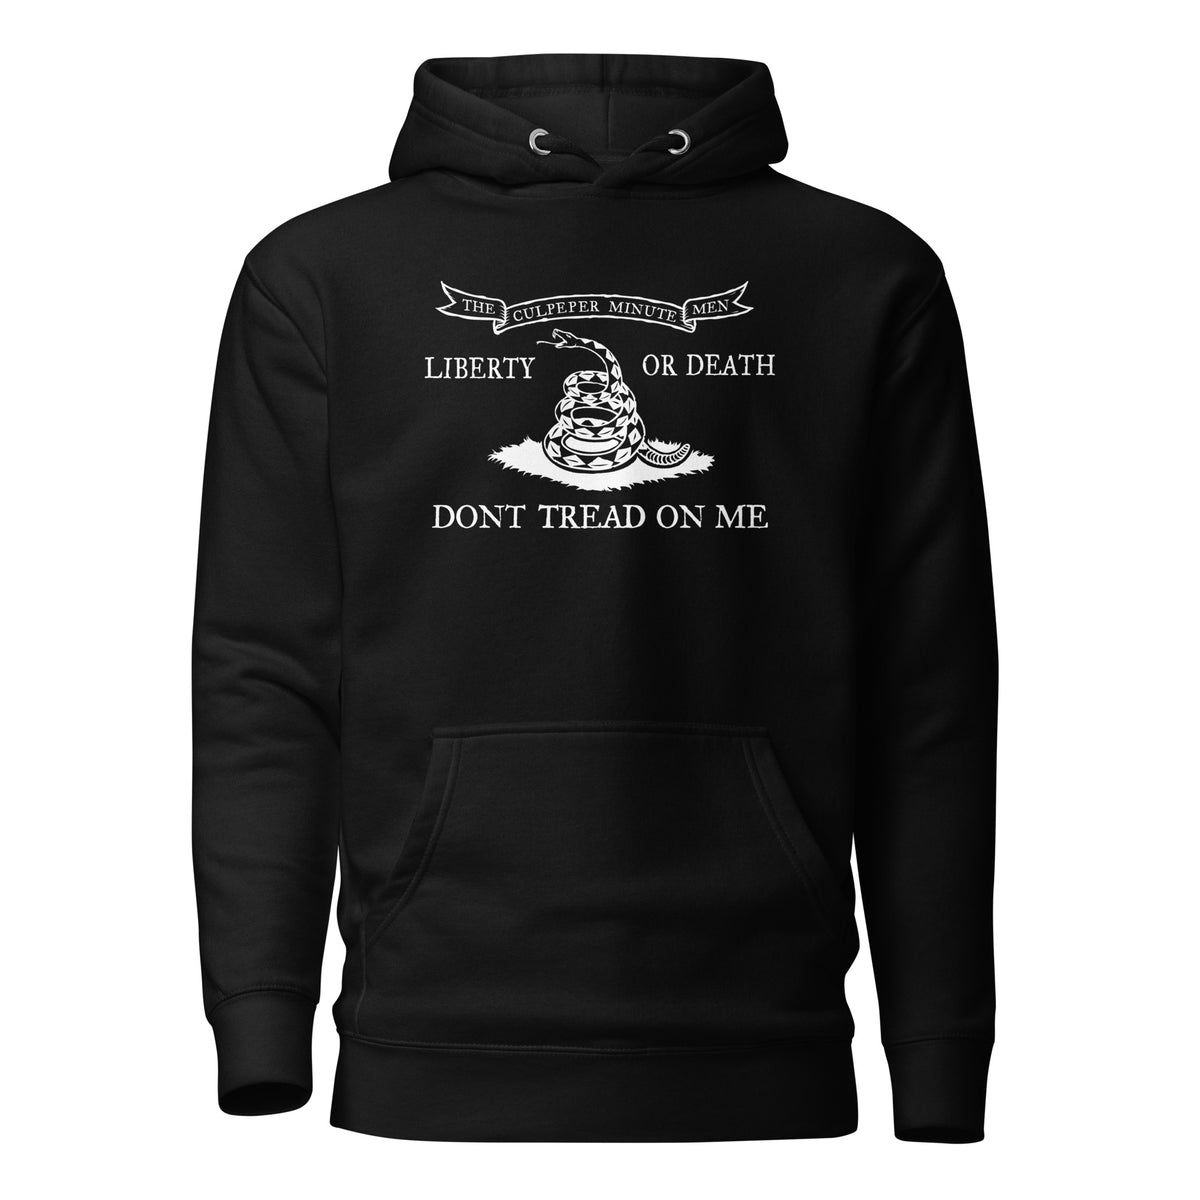 Culpeper Minute Men Don&#39;t Tread on Me Embroidered Hoodie